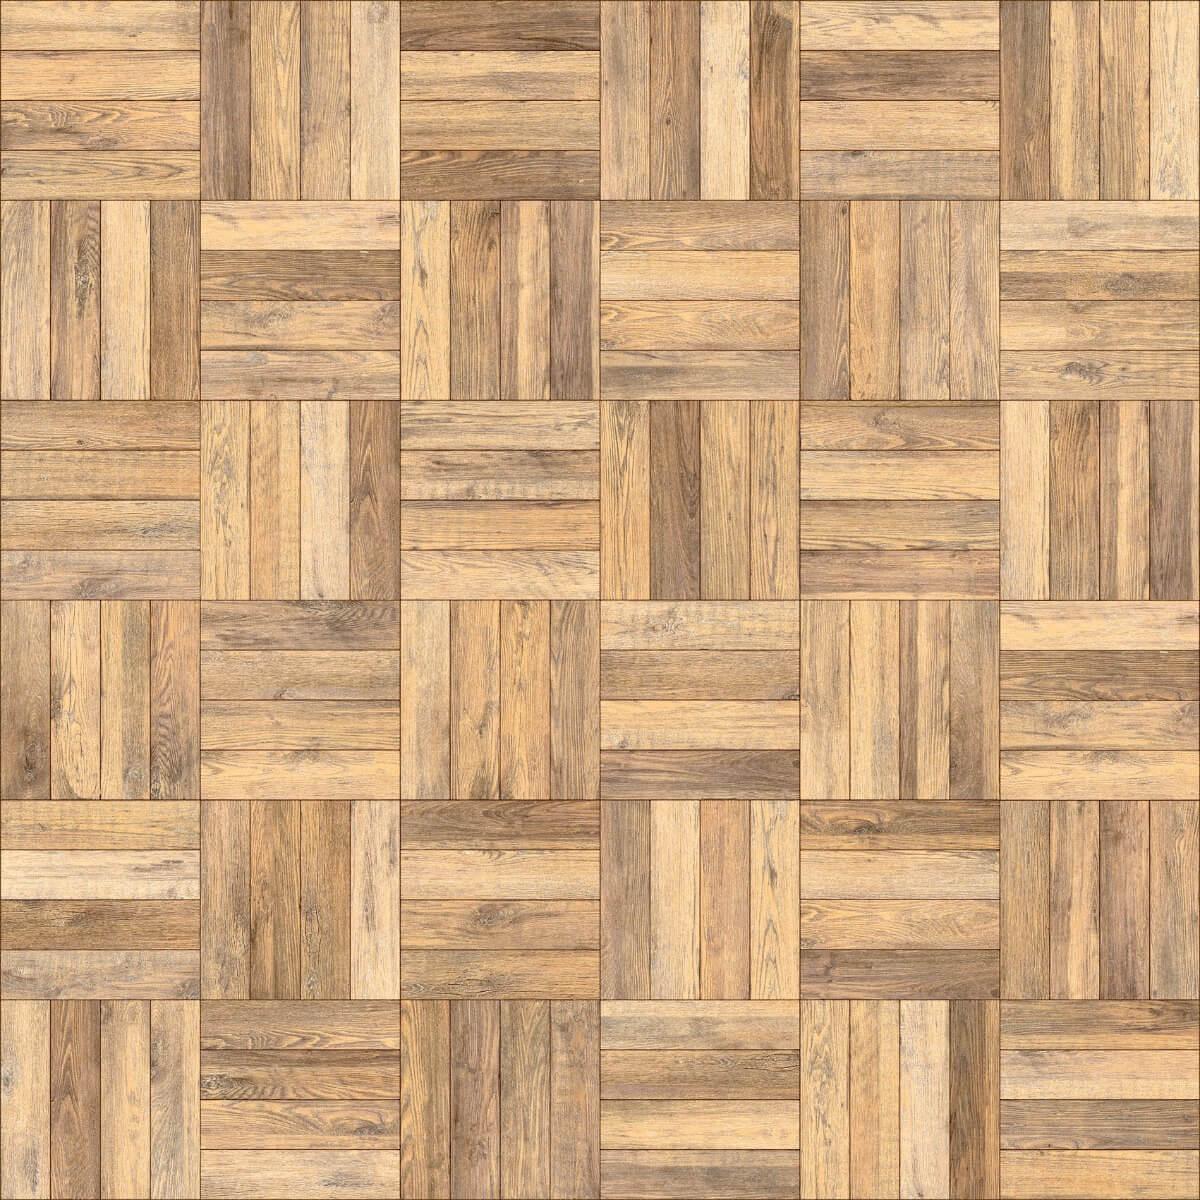 Automotive Tiles for Living Room Tiles, Bedroom Tiles, Balcony Tiles, Accent Tiles, Hospital Tiles, Automotive Tiles, High Traffic Tiles, Bar/Restaurant, Commercial/Office, Outdoor Area, Outdoor/Terrace